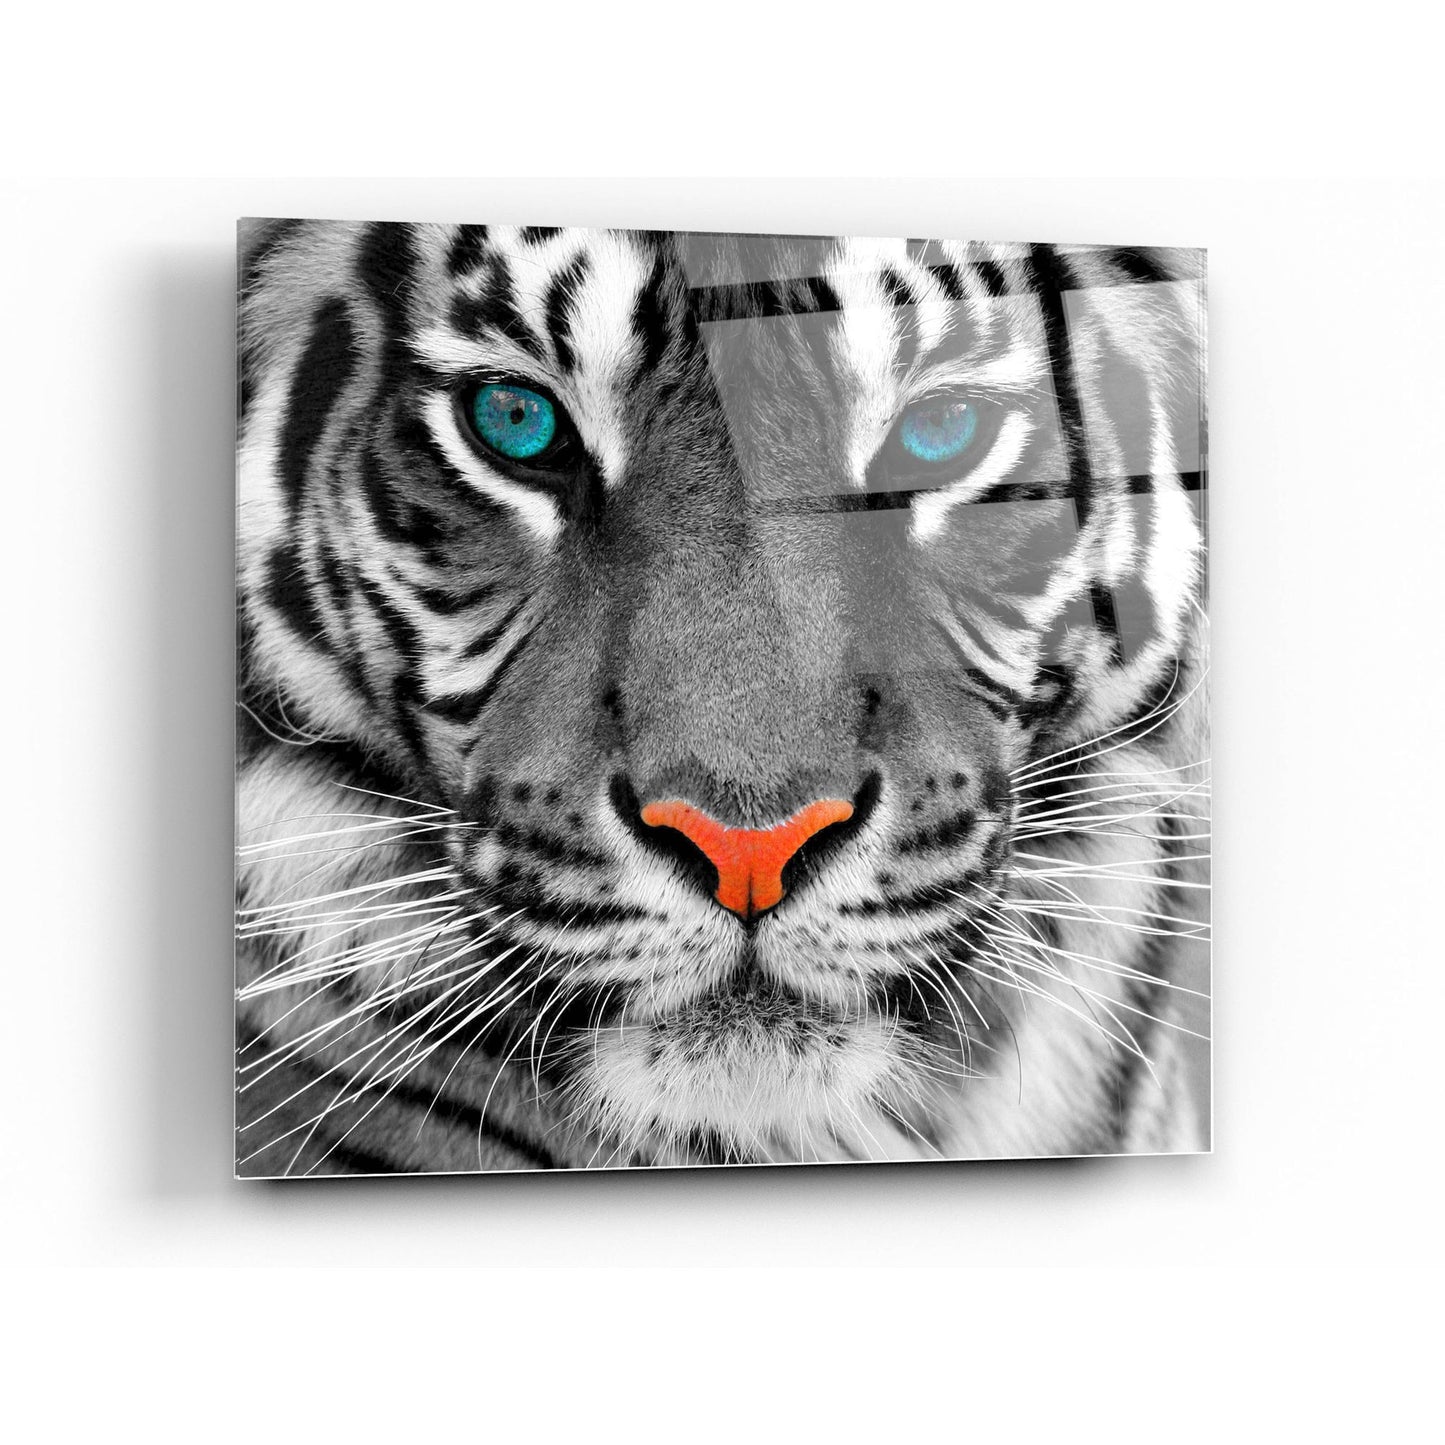 Epic Art 'Thrill of the Tiger' Acrylic Glass Wall Art